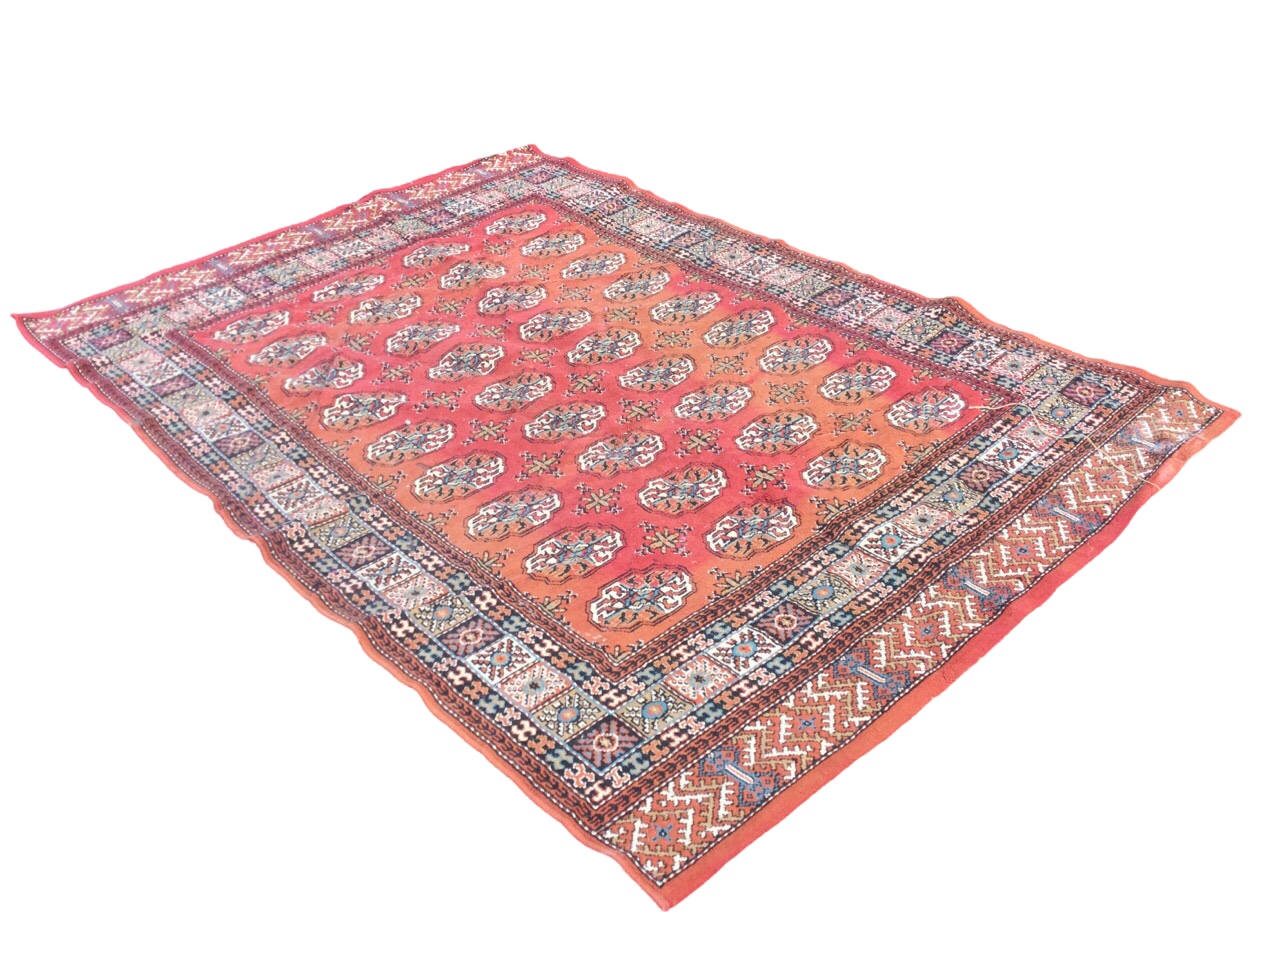 A Tekke style oriental rug woven with grid of oval floral medallions on red ground, framed by border